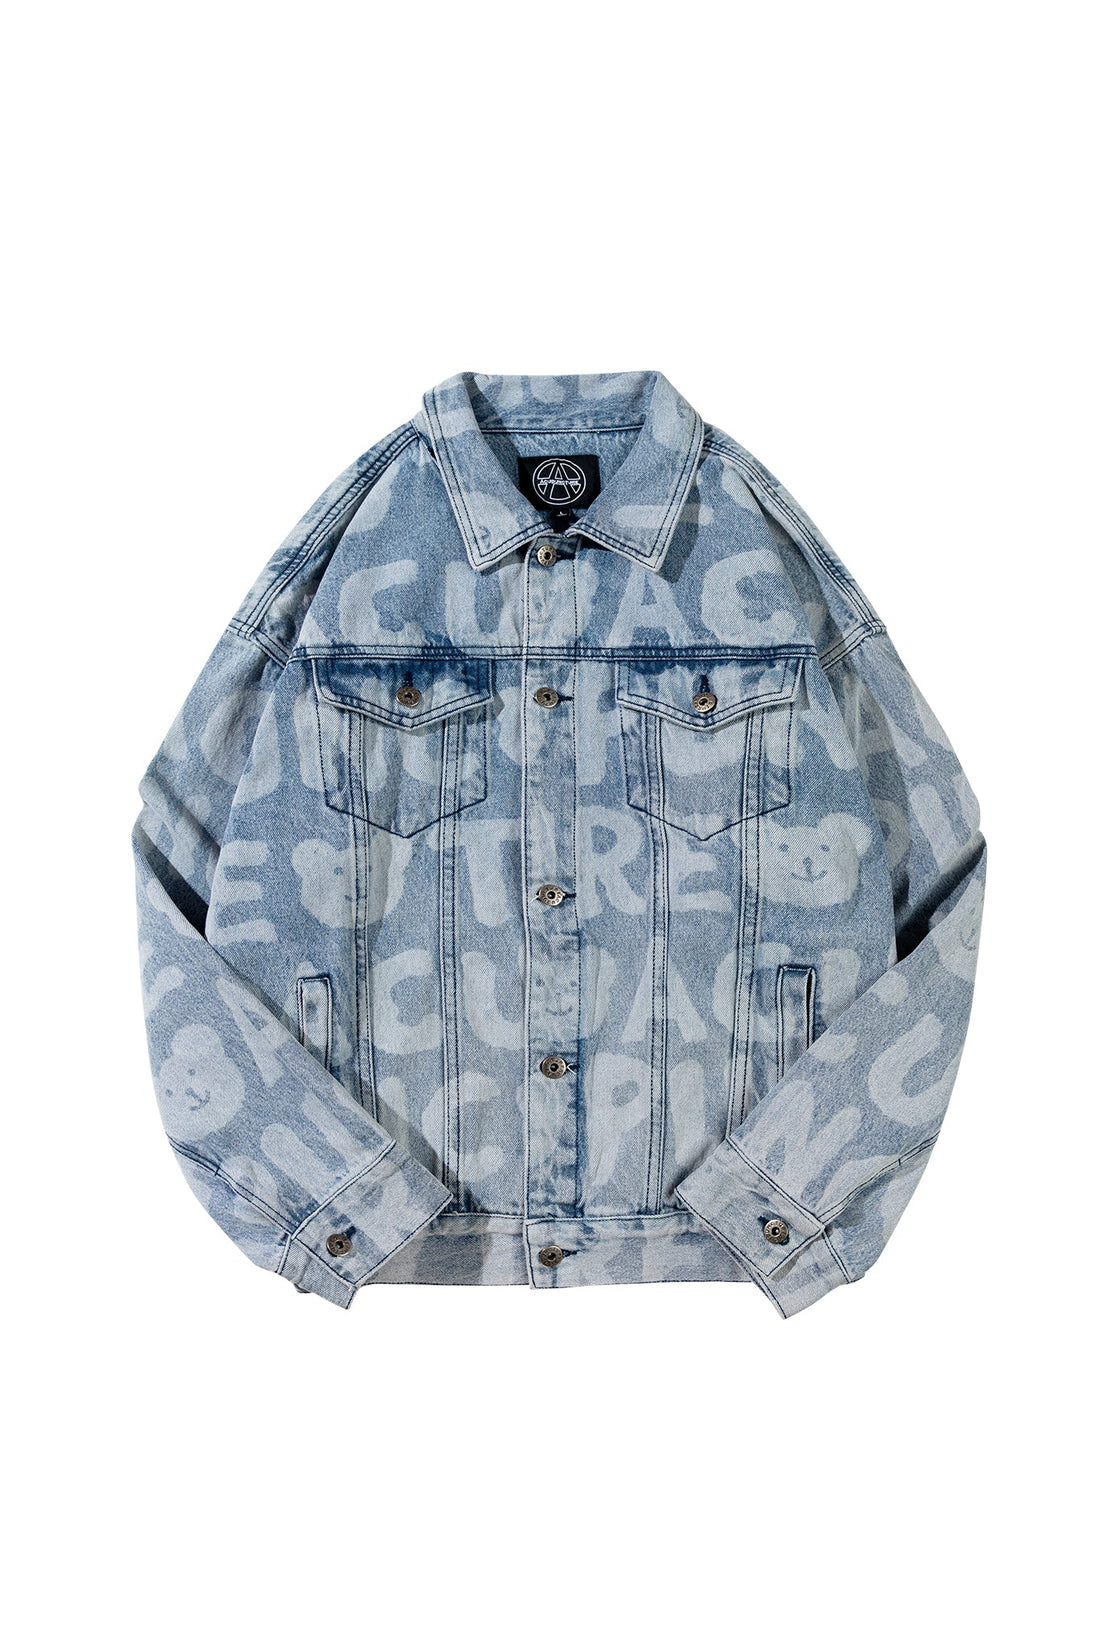 ALL-OVER BLUE DENIM JACKET Acupuncture